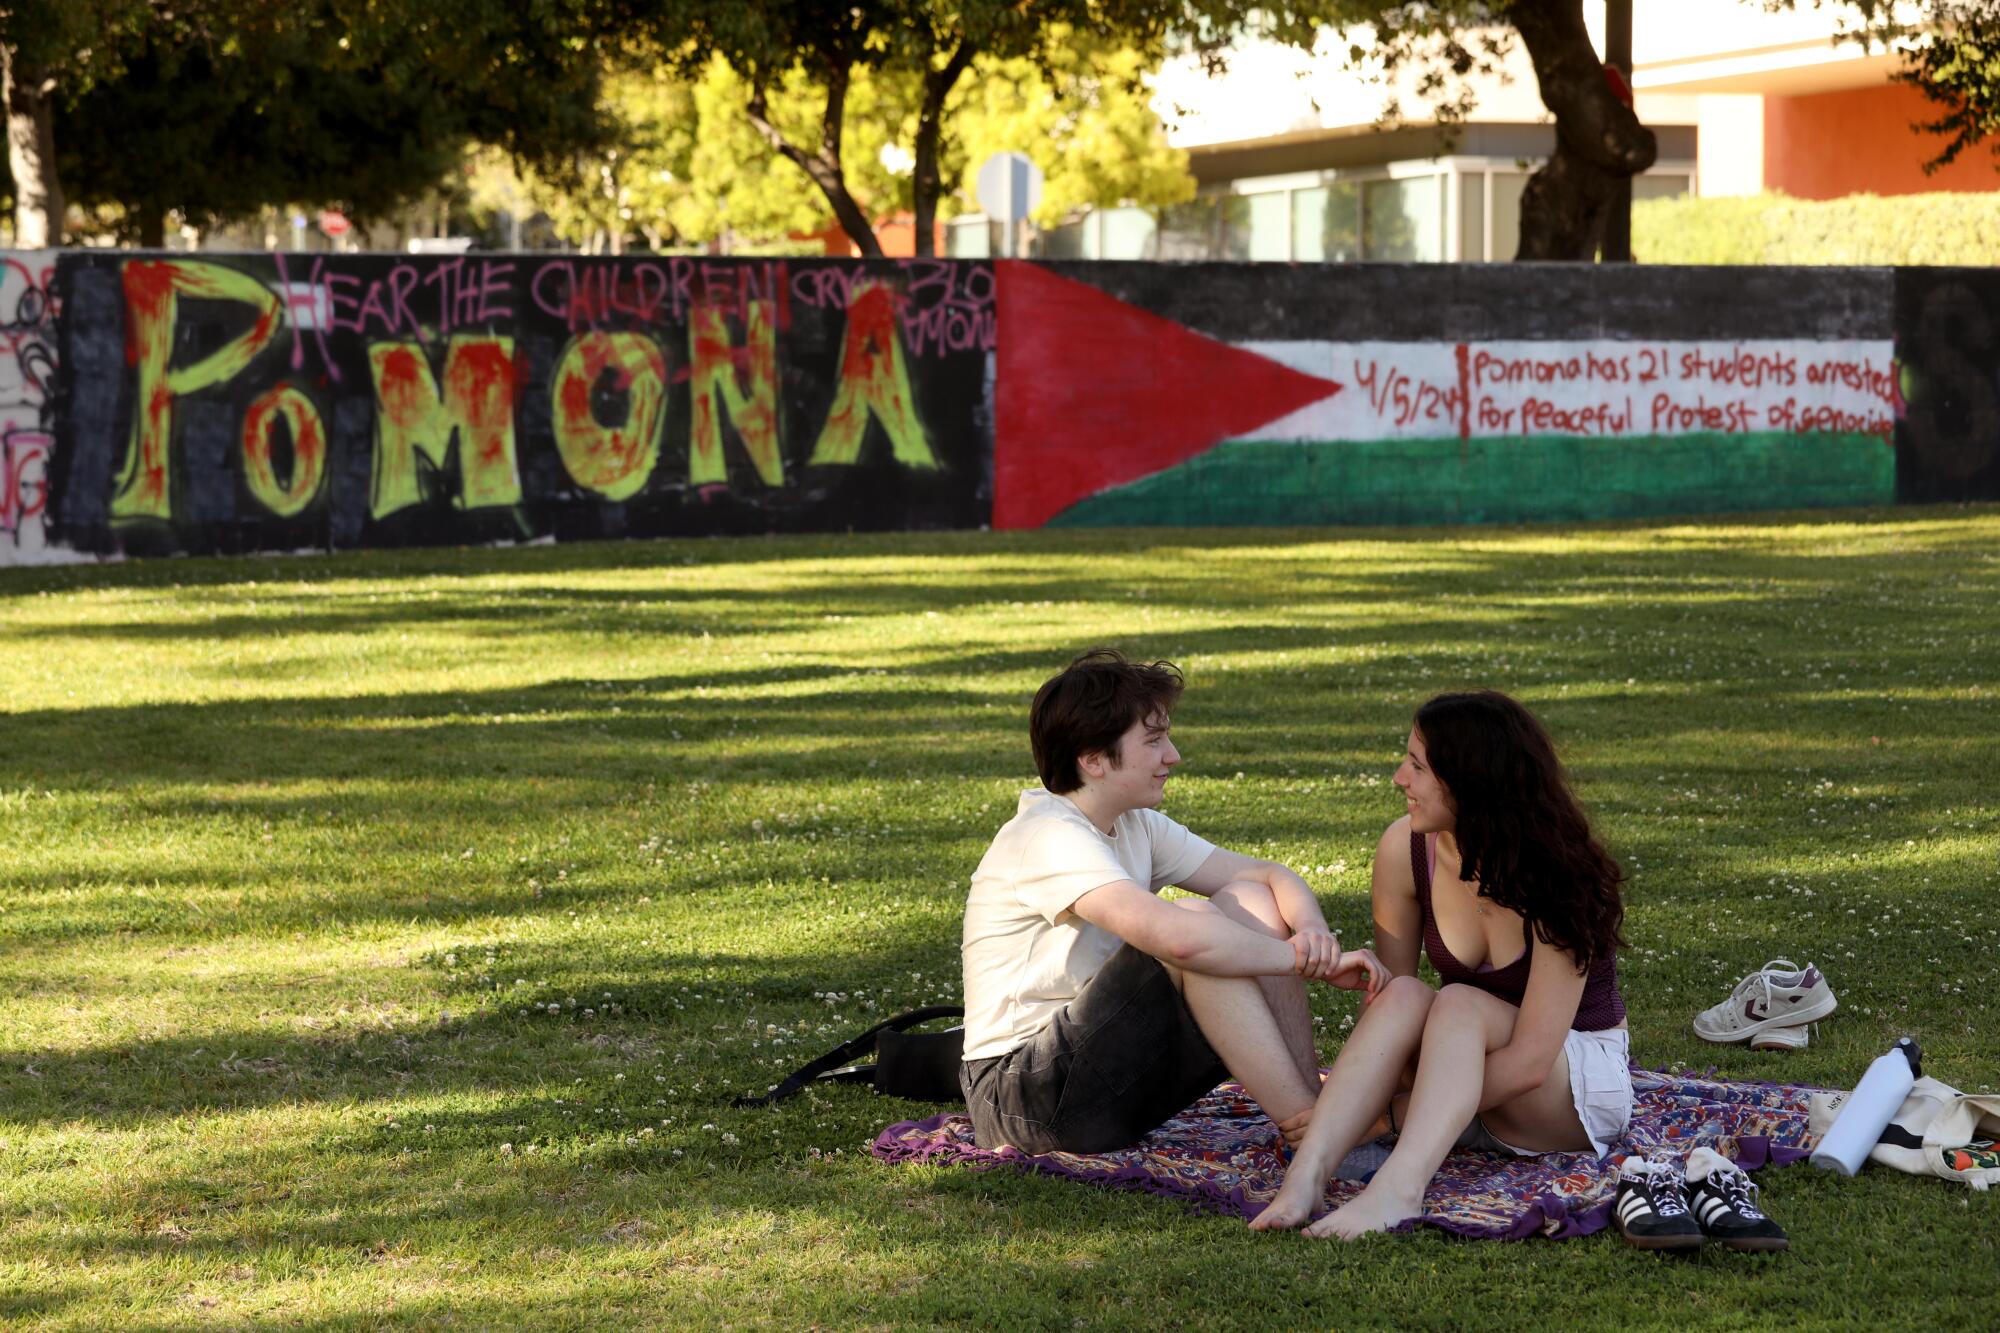 Pomona students Morgan Sydor and Rebecca Allen sit in a grassy area near a wall with writing on it.